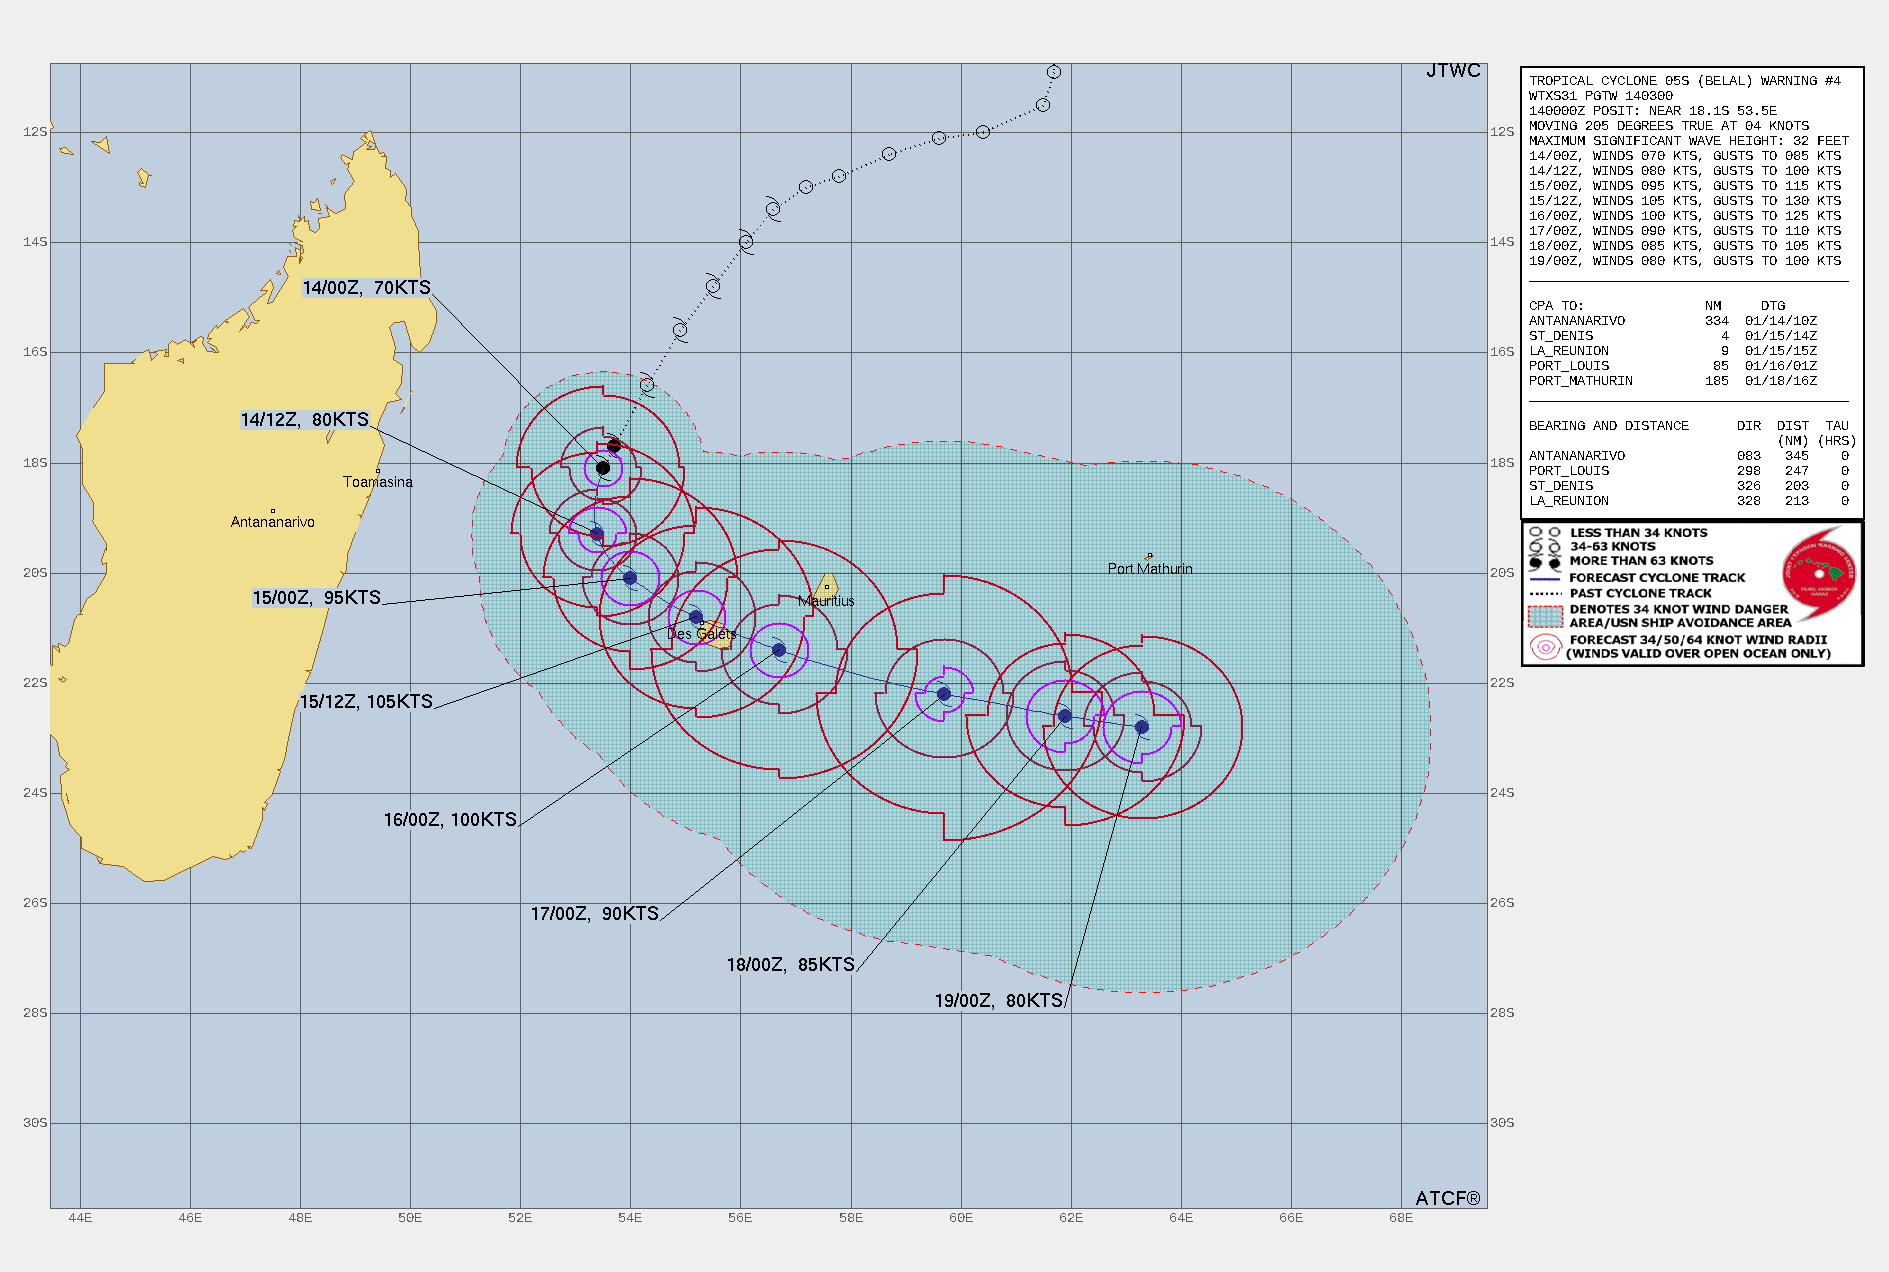 FORECAST REASONING.  SIGNIFICANT FORECAST CHANGES: THERE ARE NO SIGNIFICANT CHANGES TO THE FORECAST FROM THE PREVIOUS WARNING.  FORECAST DISCUSSION: TROPICAL CYCLONE (TC) 05S (BELAL) IS FORECAST TO CONTINUE ITS SLOW MOVEMENT TO THE SOUTH-SOUTHWEST ALONG THE WESTERN EDGE OF THE STR THROUGH TAU 12 AS IT CRESTS THE STR AXIS. AFTERWARD, TC BELAL WILL SHARPLY TURN TO THE SOUTHEAST AS THE STR WEAKENS AND THE WESTERLIES SHIFT OVER MADAGASCAR. TC BELAL IS UNDERGOING RAPID INTENSIFICATION AT THIS TIME, AND WILL CONTINUE UNDER VERY FAVORABLE ENVIRONMENTAL CONDITIONS UNTIL TAU 36. SLIGHT WEAKENING WILL BEGIN AT TAU 48 DUE TO A SLIGHT INCREASE IN VERTICAL WIND SHEAR (VWS) ASSOCIATED WITH THE STRENGTHENING SUB TROPICAL WESTERLIES AND INCREASED DRY AIR ENTERTAINMENT WRAPPING AROUND THE NORTHERN PERIPHERY OF THE TROPICAL CYCLONE. TC BELAL WILL TRACK TO THE EAST-SOUTHEASTWARD THROUGH TAU 120 ALONG THE AFOREMENTIONED STR POSITIONED TO THE NORTHEAST. ALTHOUGH REINTENSIFICATION IS NOT FORECASTED AT THIS TIME, AN INCREASE IN THE SUBTROPICAL WESTERLIES WILL SLOW DISSIPATION OF TC BELAL TO THE SOUTHEAST INTO TAU 120.